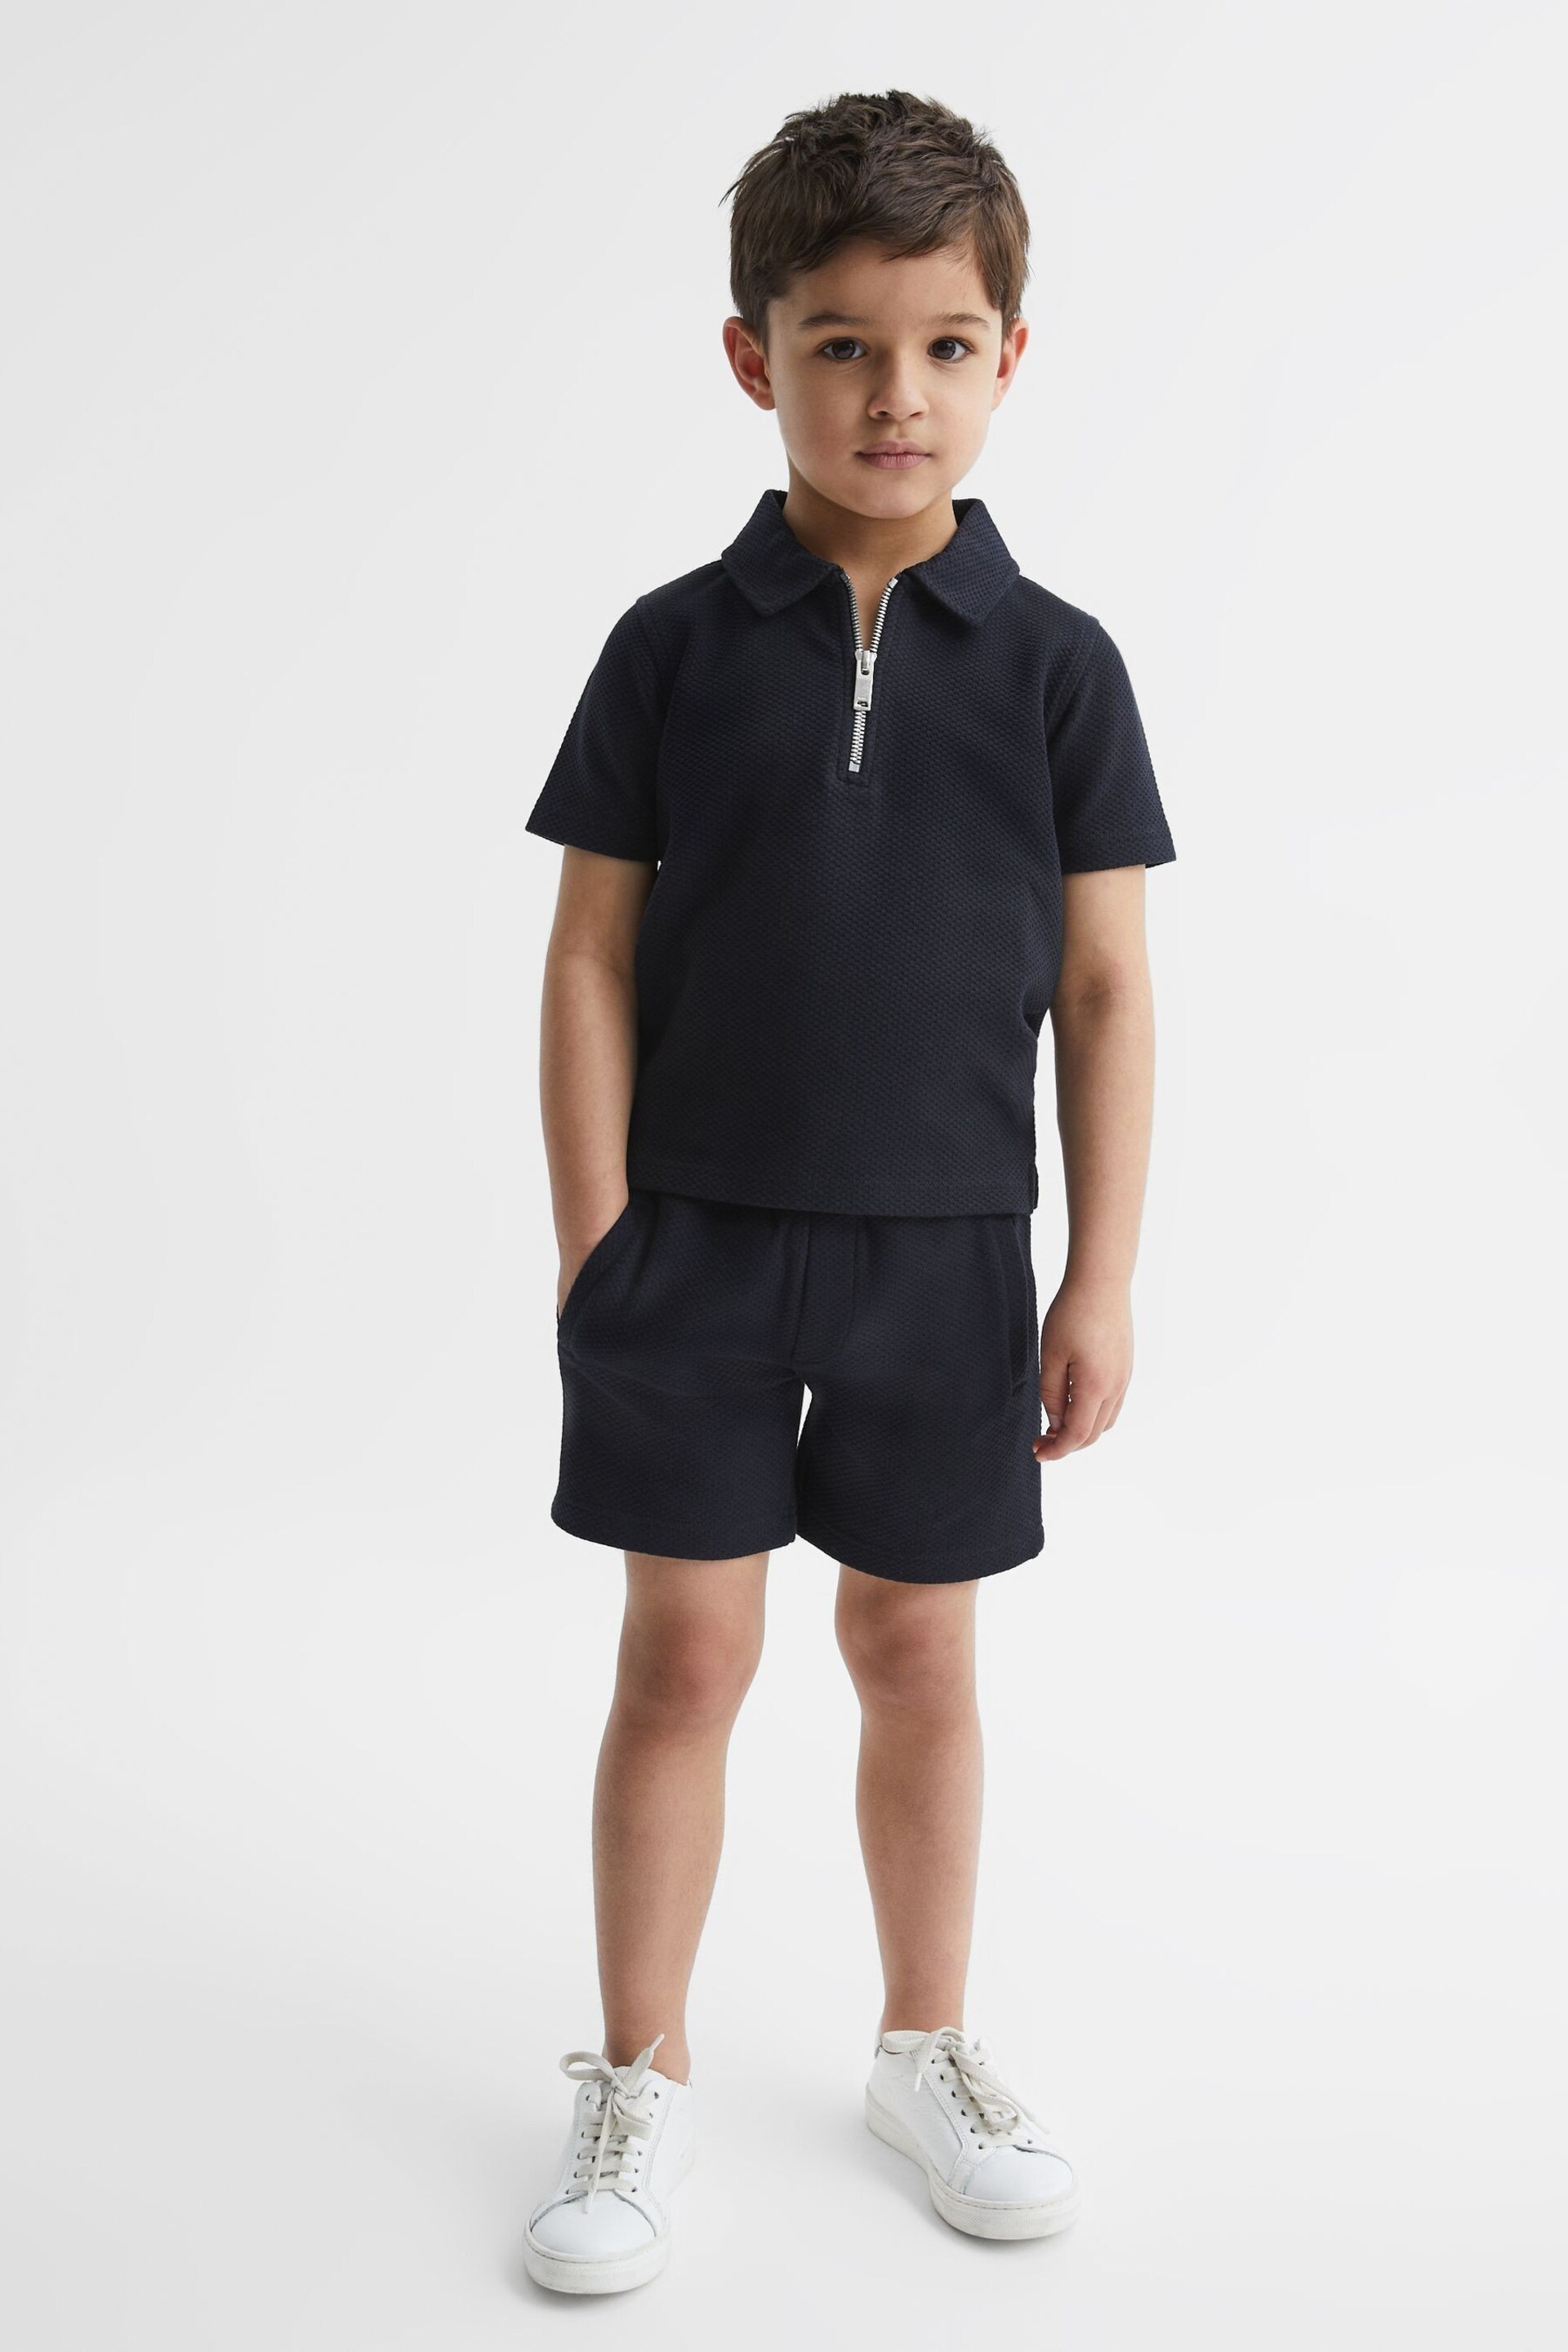 Reiss Navy Creed Junior Slim Fit Textured Half Zip Polo Shirt - Image 3 of 6